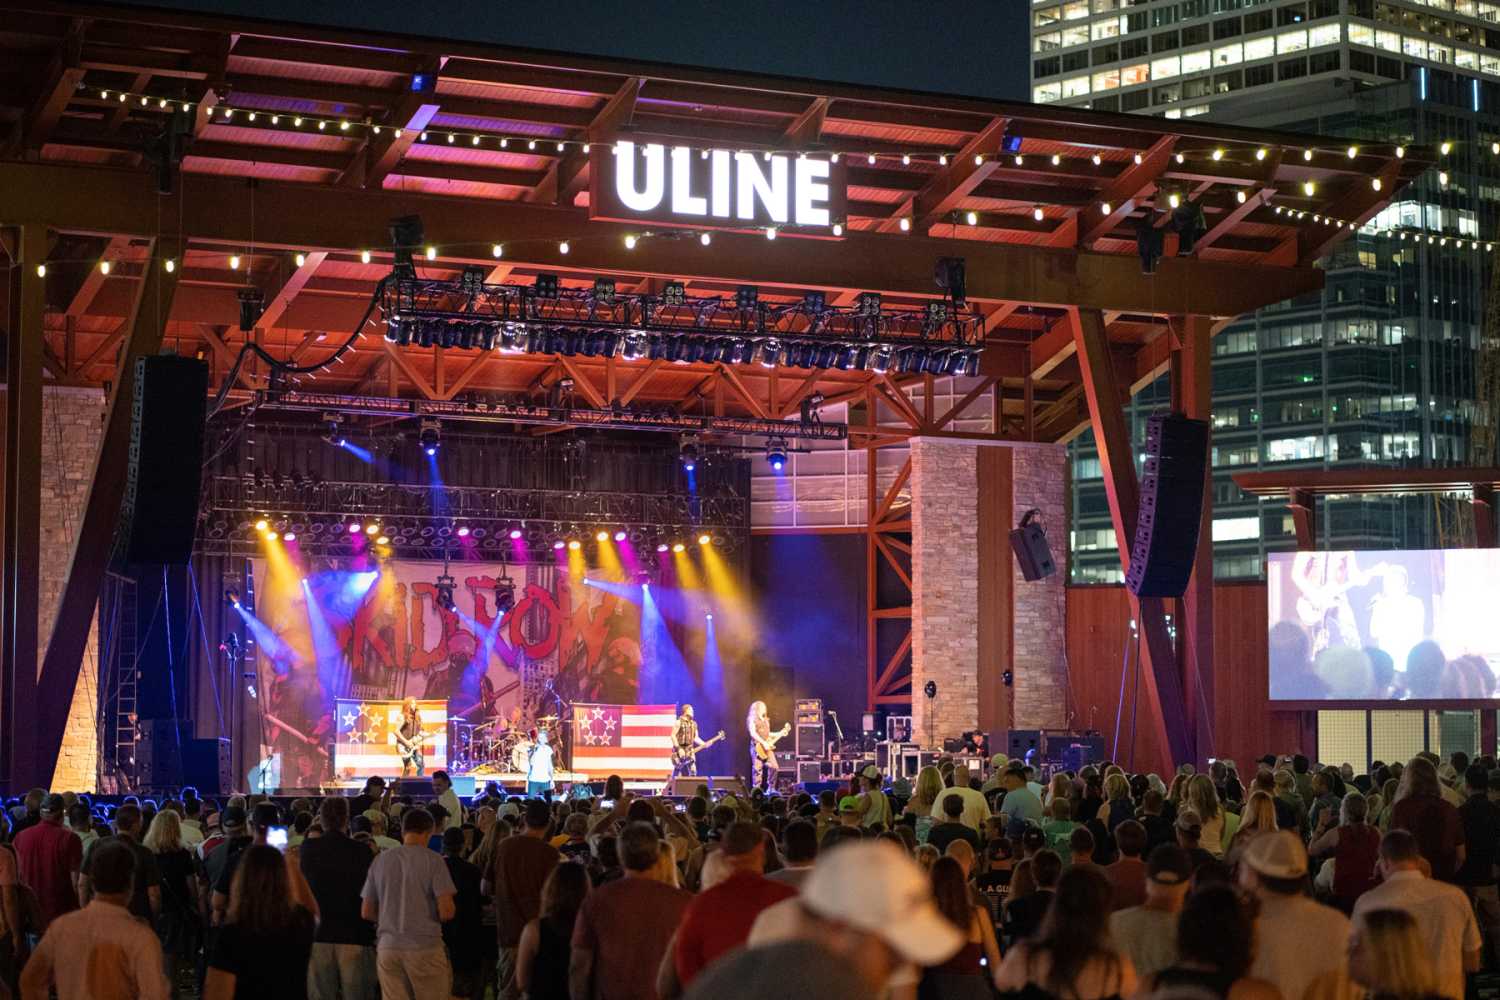 The Uline Warehouse stage at Summerfest 2022 (photo: Jay Baumgardner for Clearwing Productions)